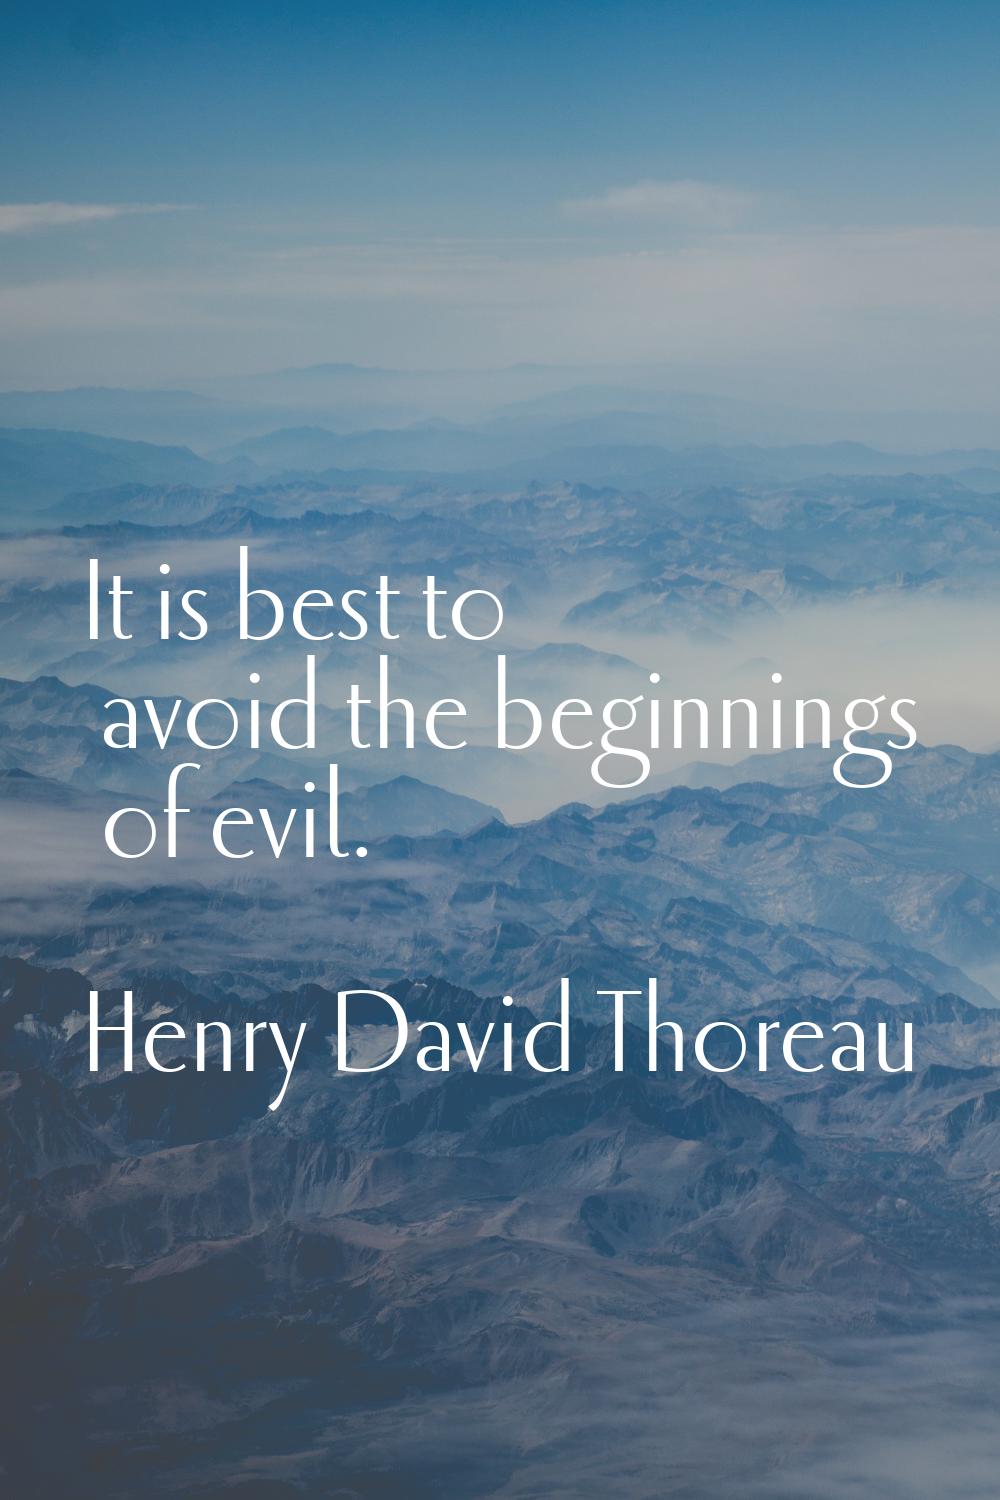 It is best to avoid the beginnings of evil.